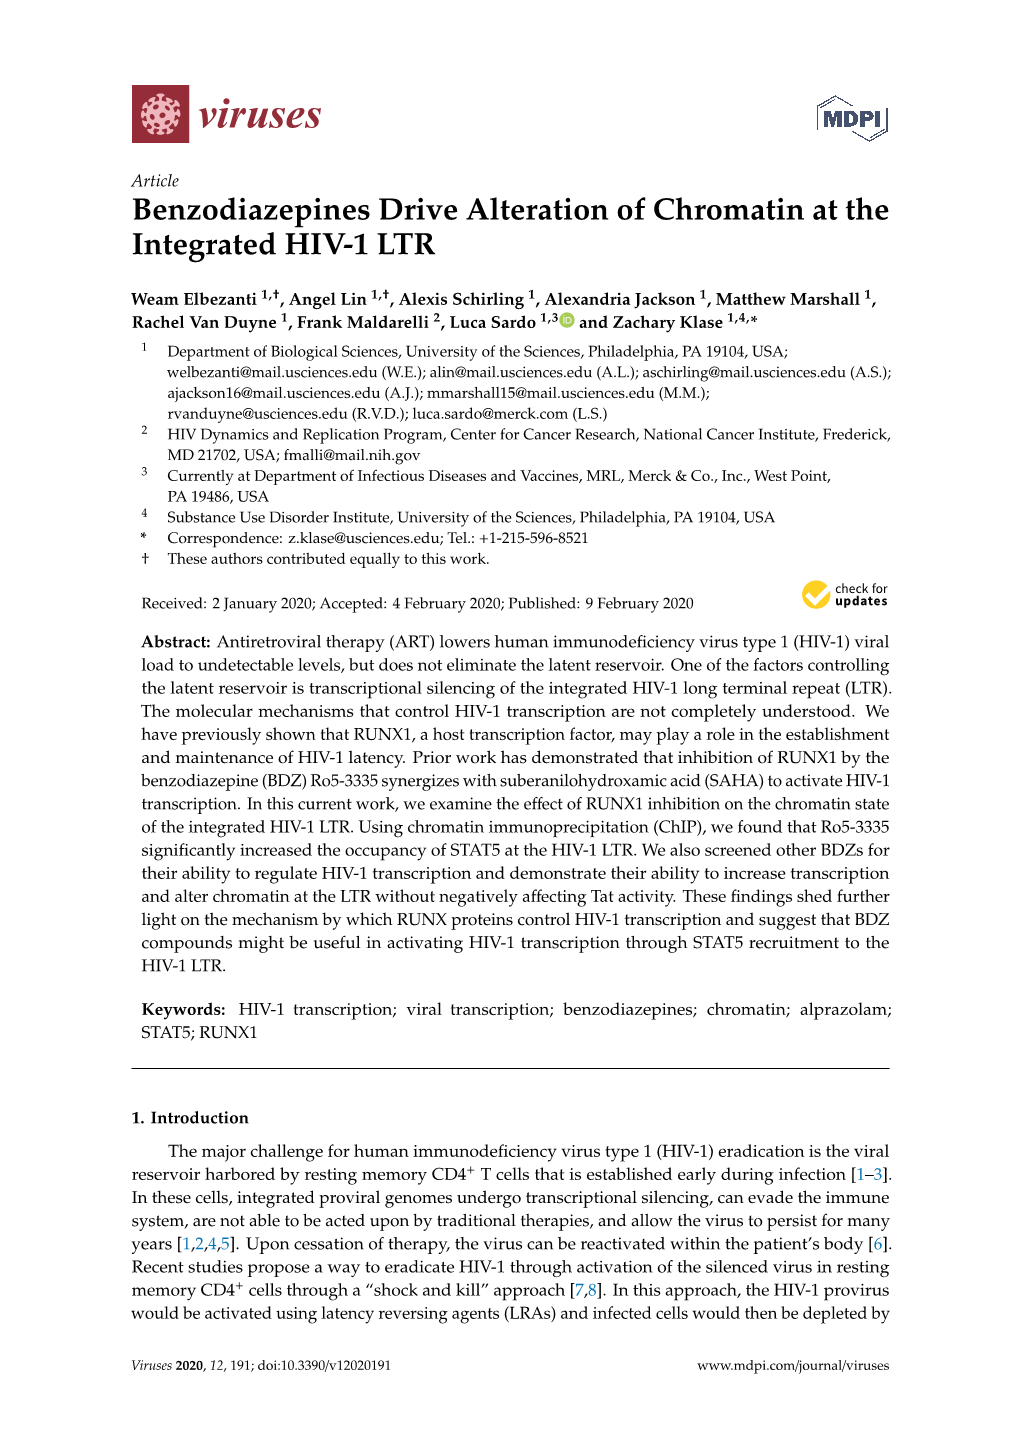 Benzodiazepines Drive Alteration of Chromatin at the Integrated HIV-1 LTR